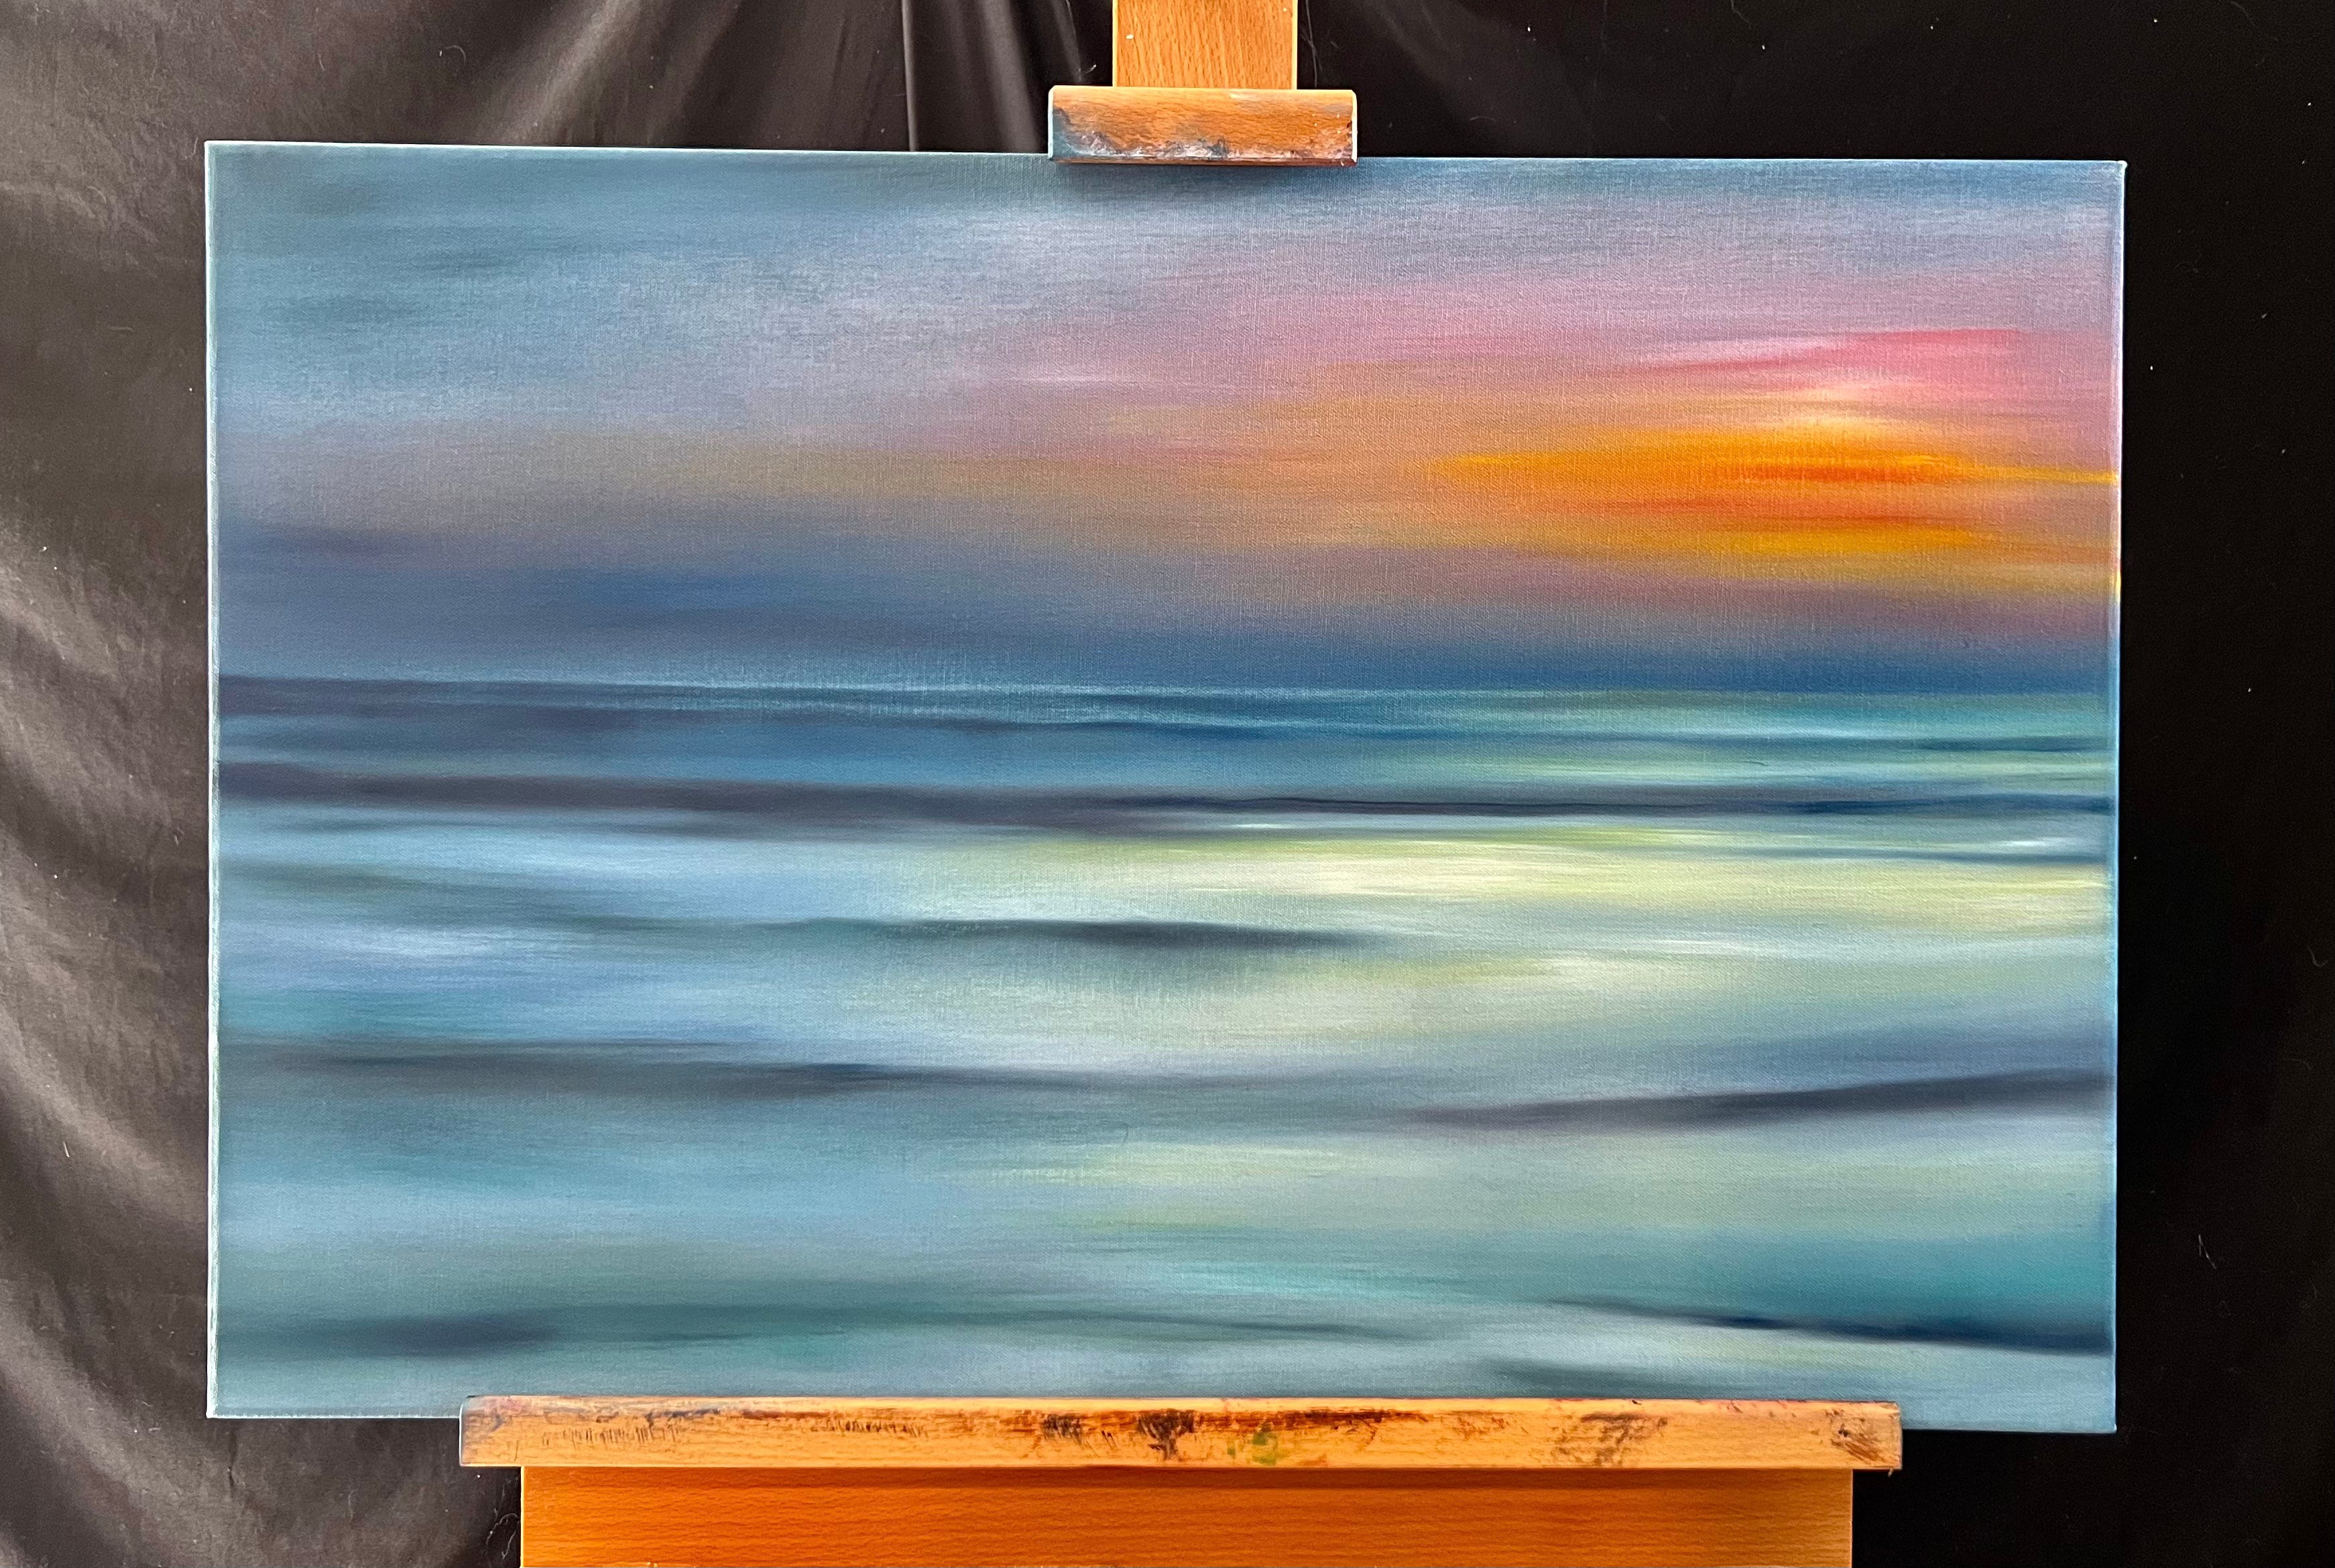 A photo of a painting of an abstract seascape.